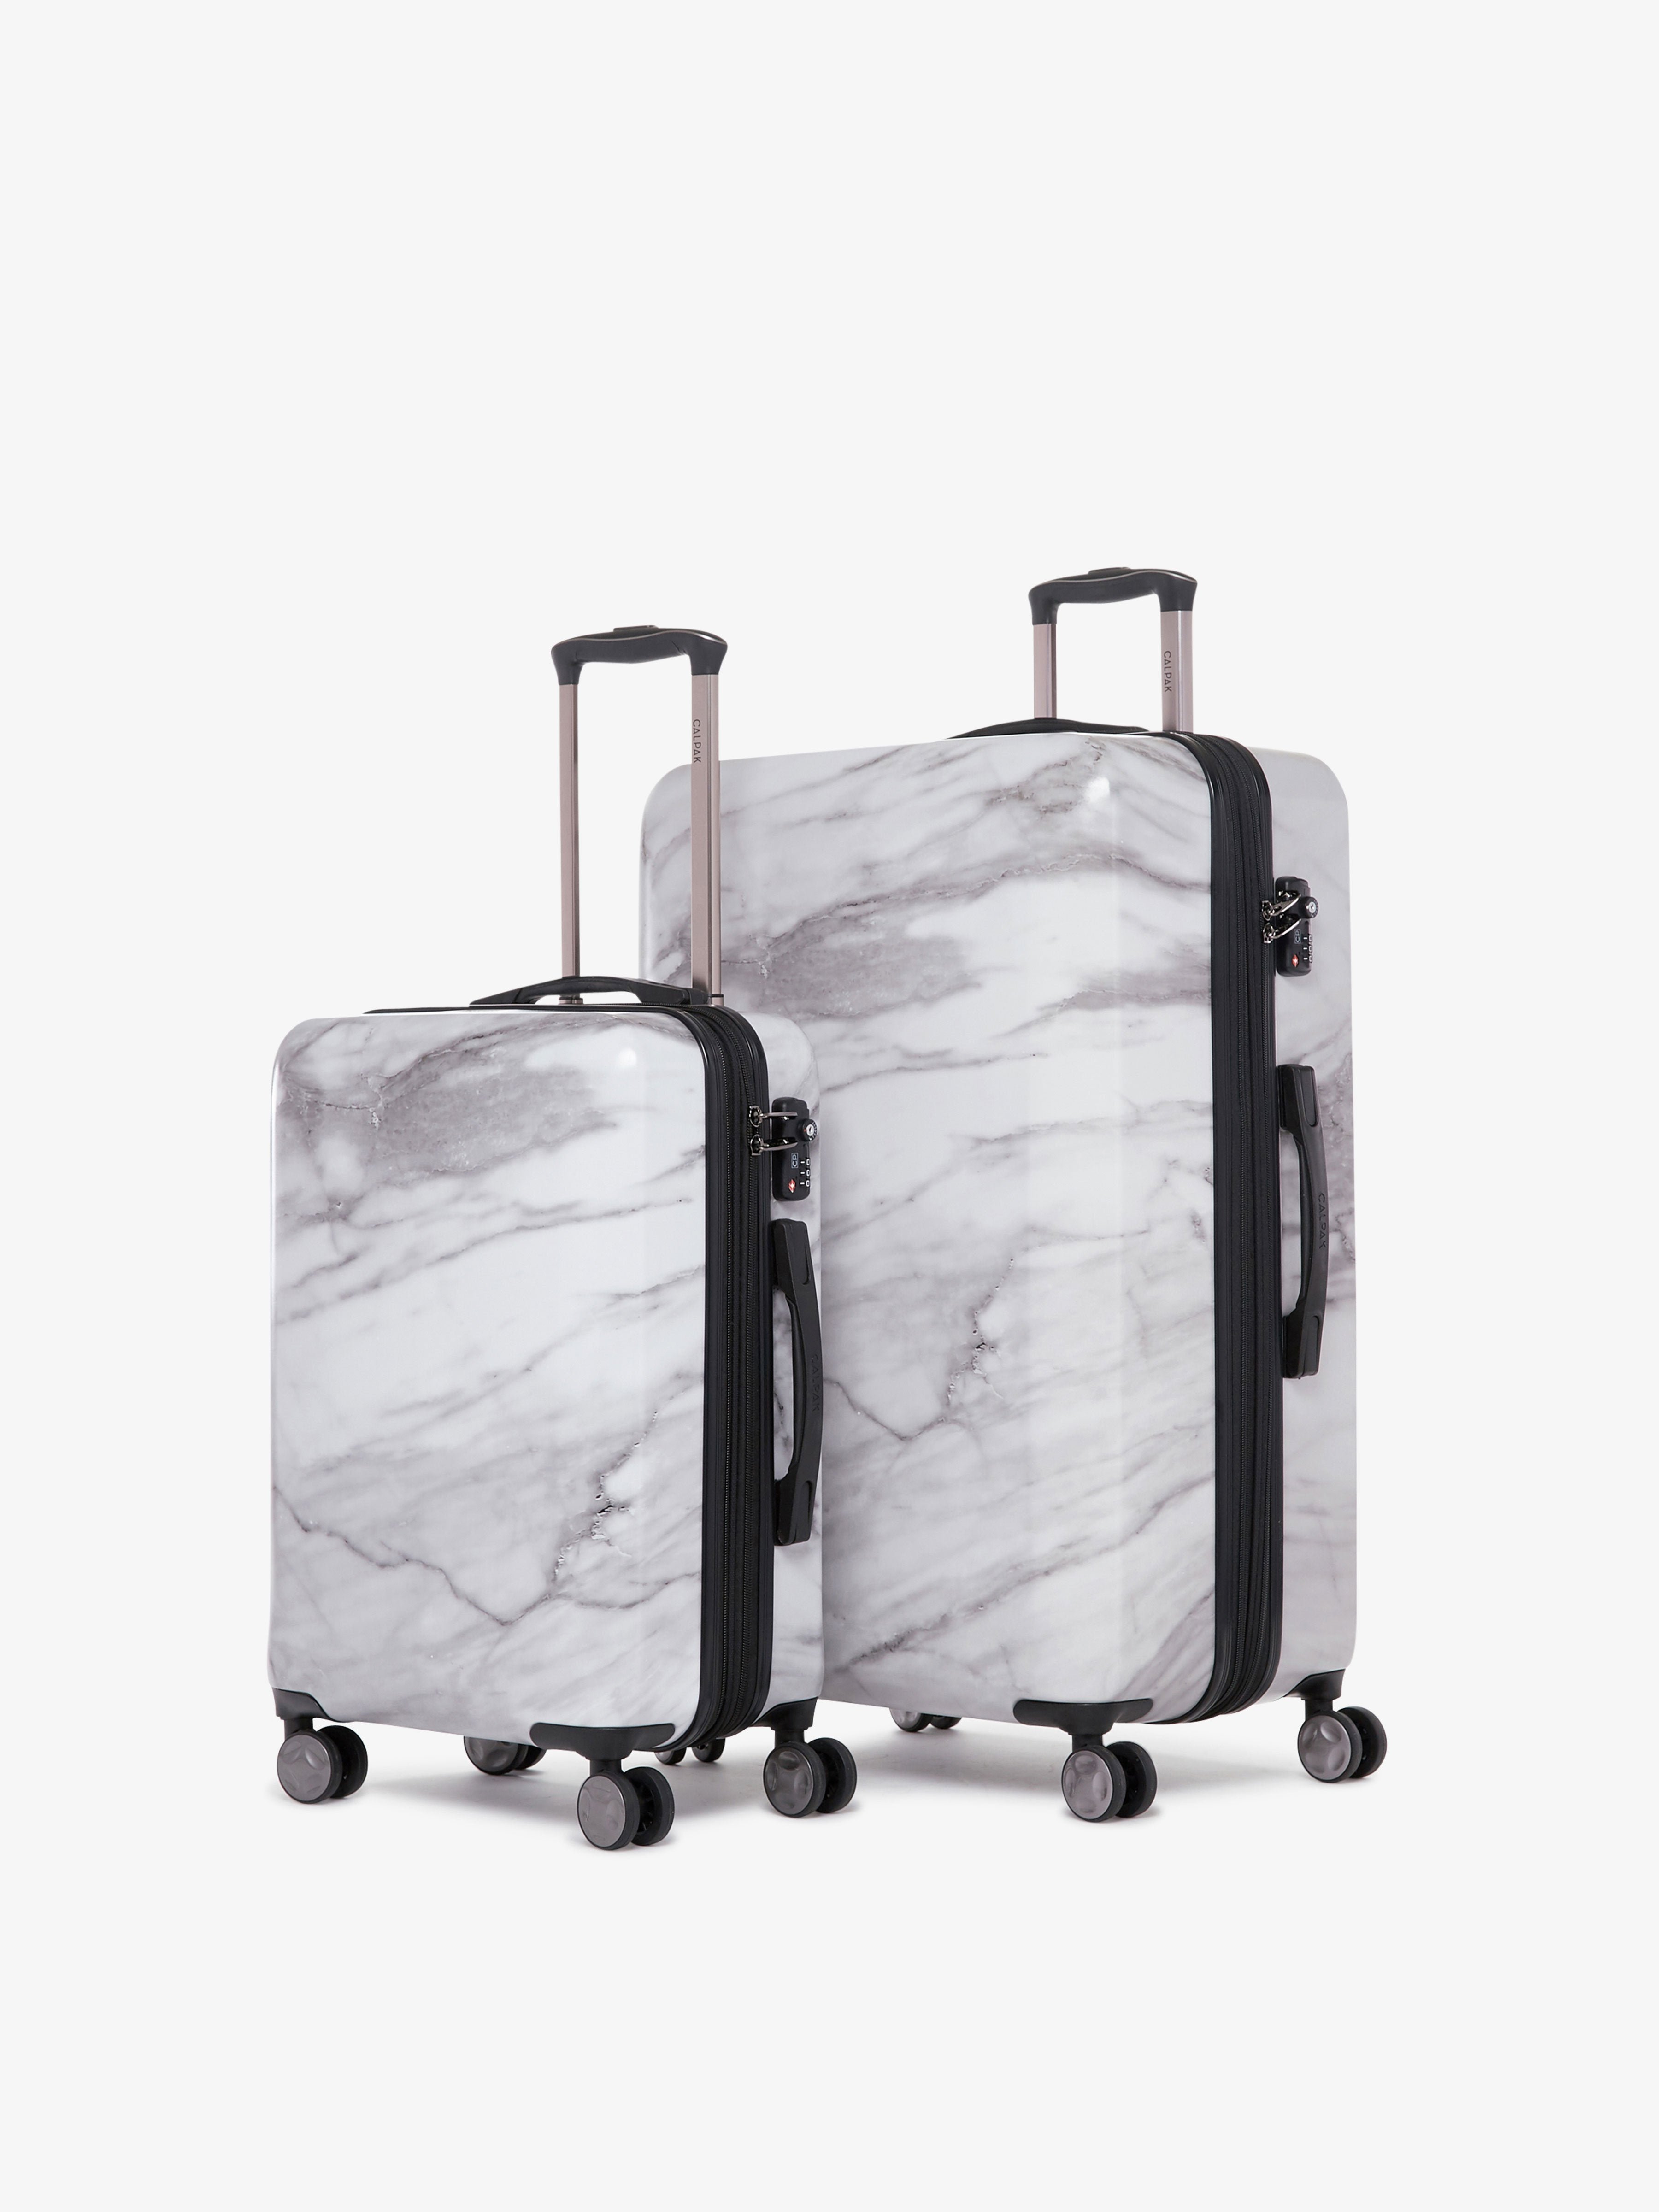 2 piece CALPAK Astyll white marble luggage set that includes carry on and large suitcase